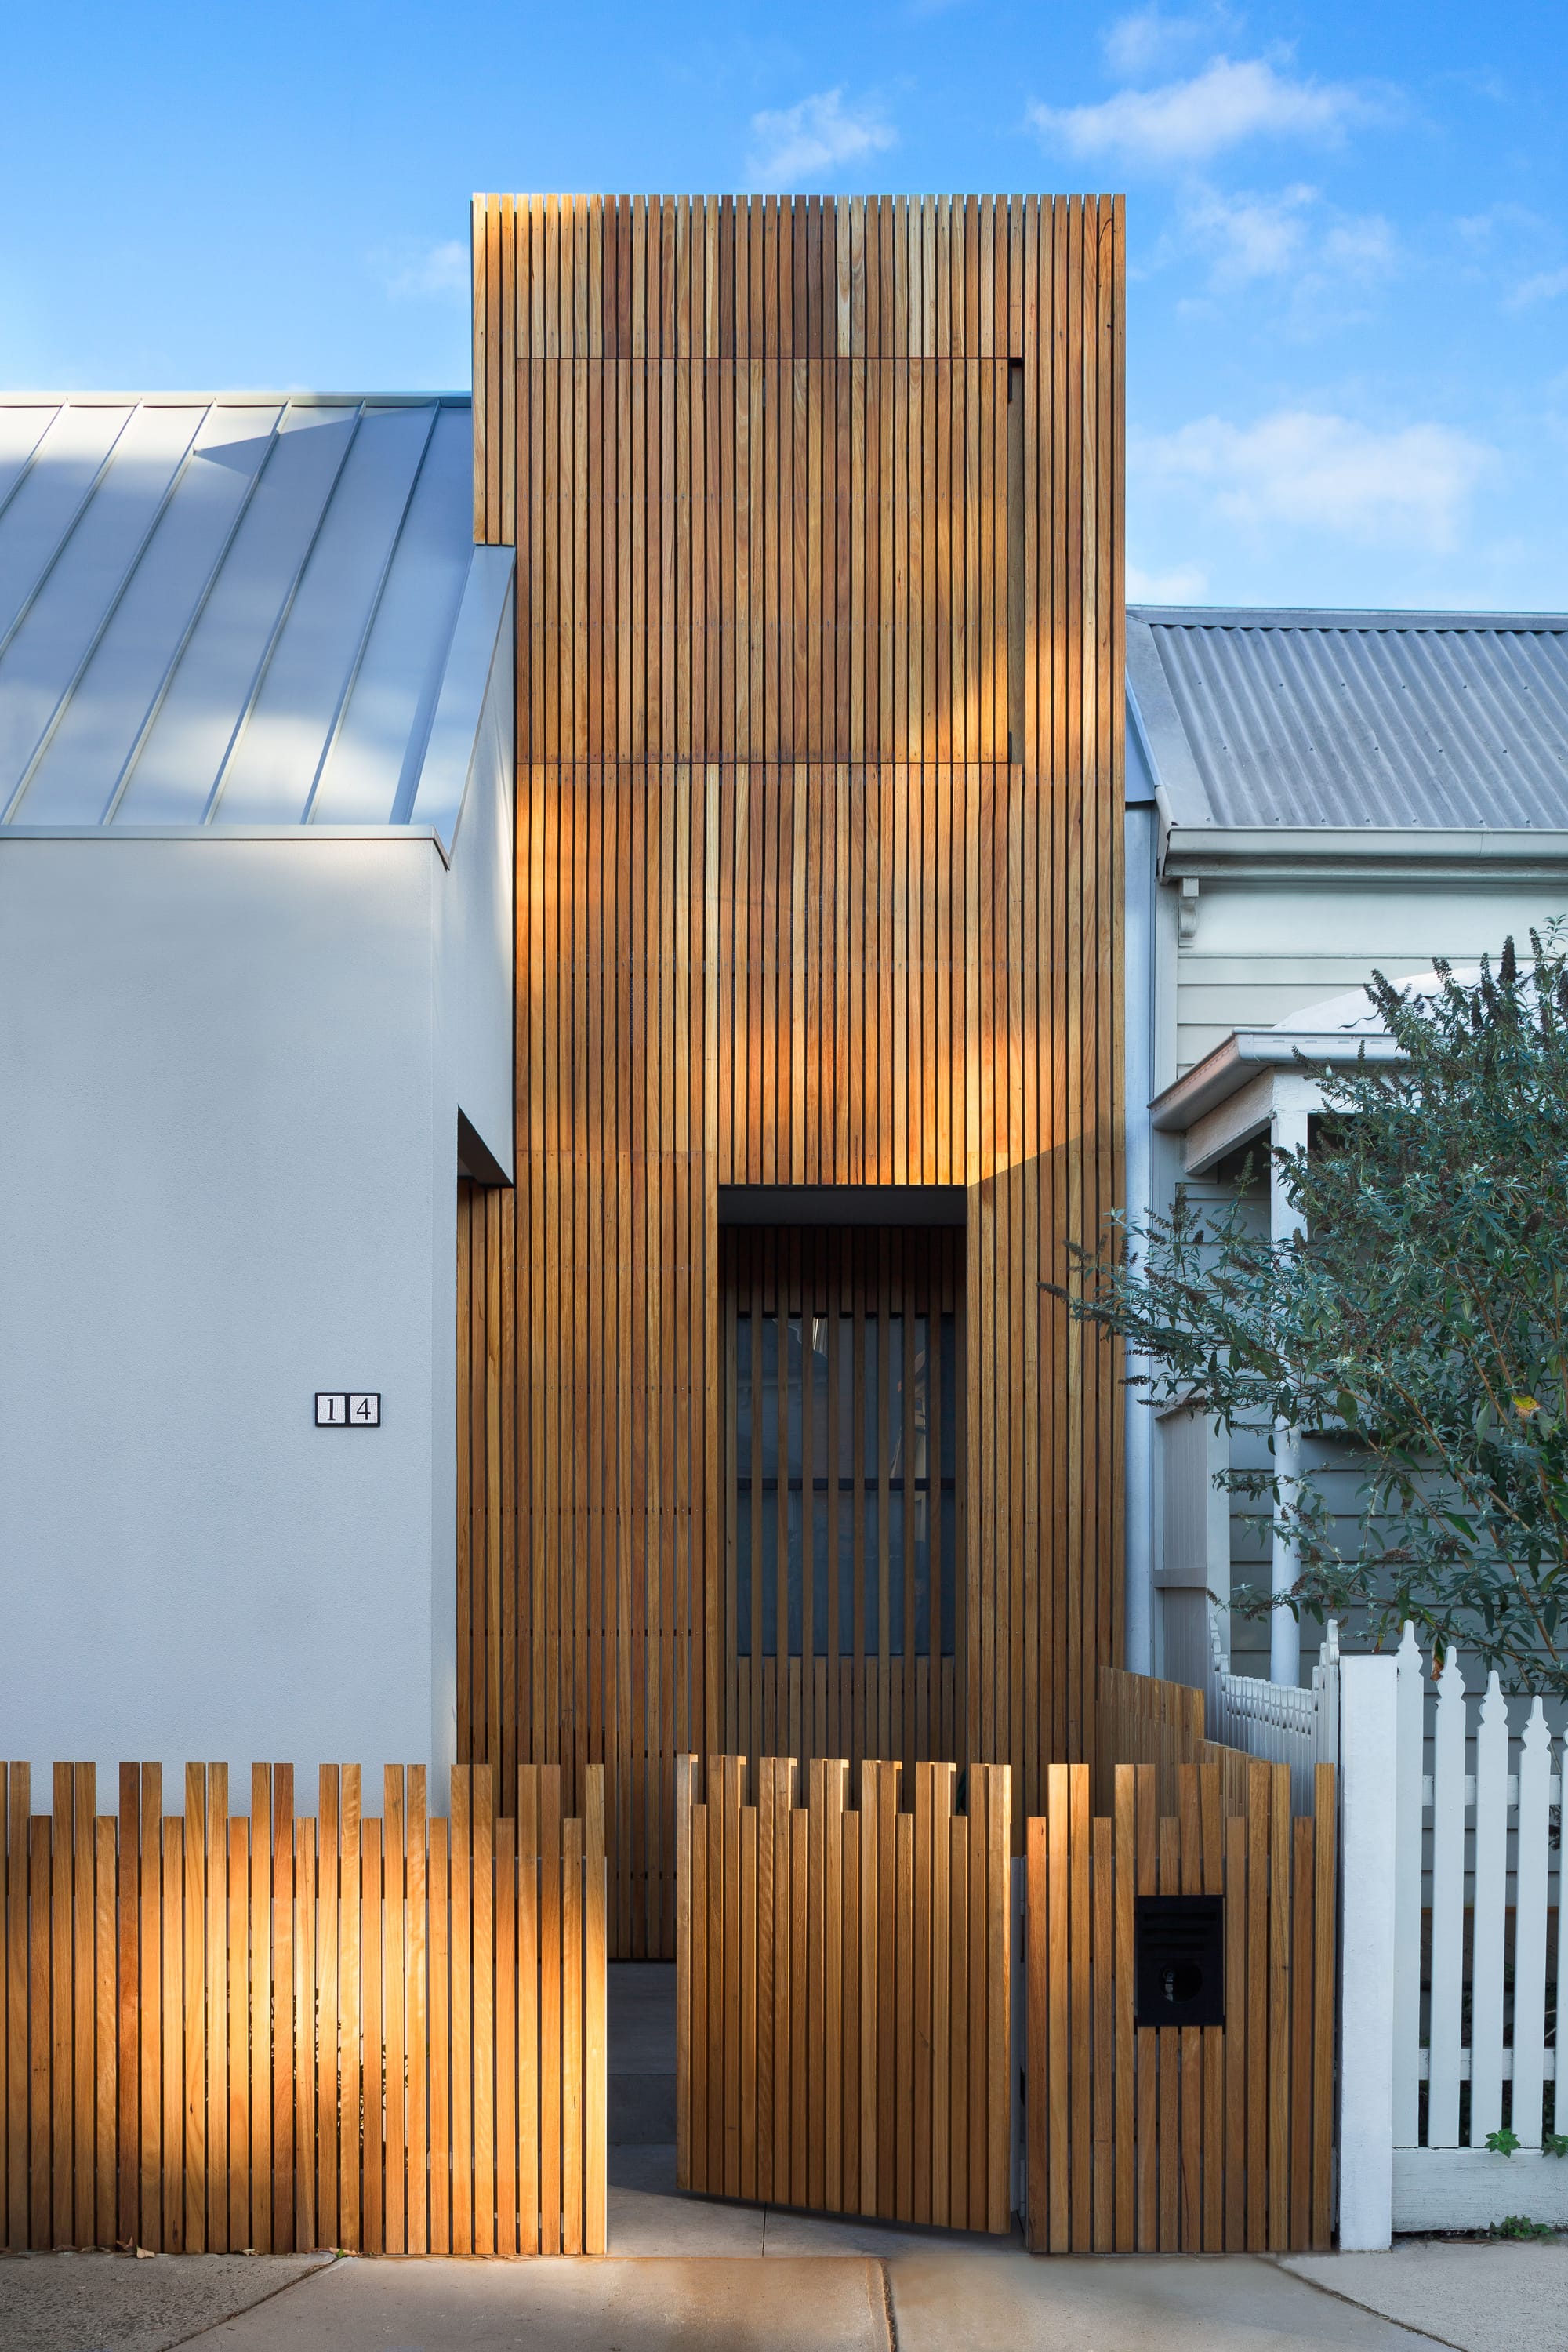 A shot from the street showing the renovated houses facade with timber and render and a timber front fence